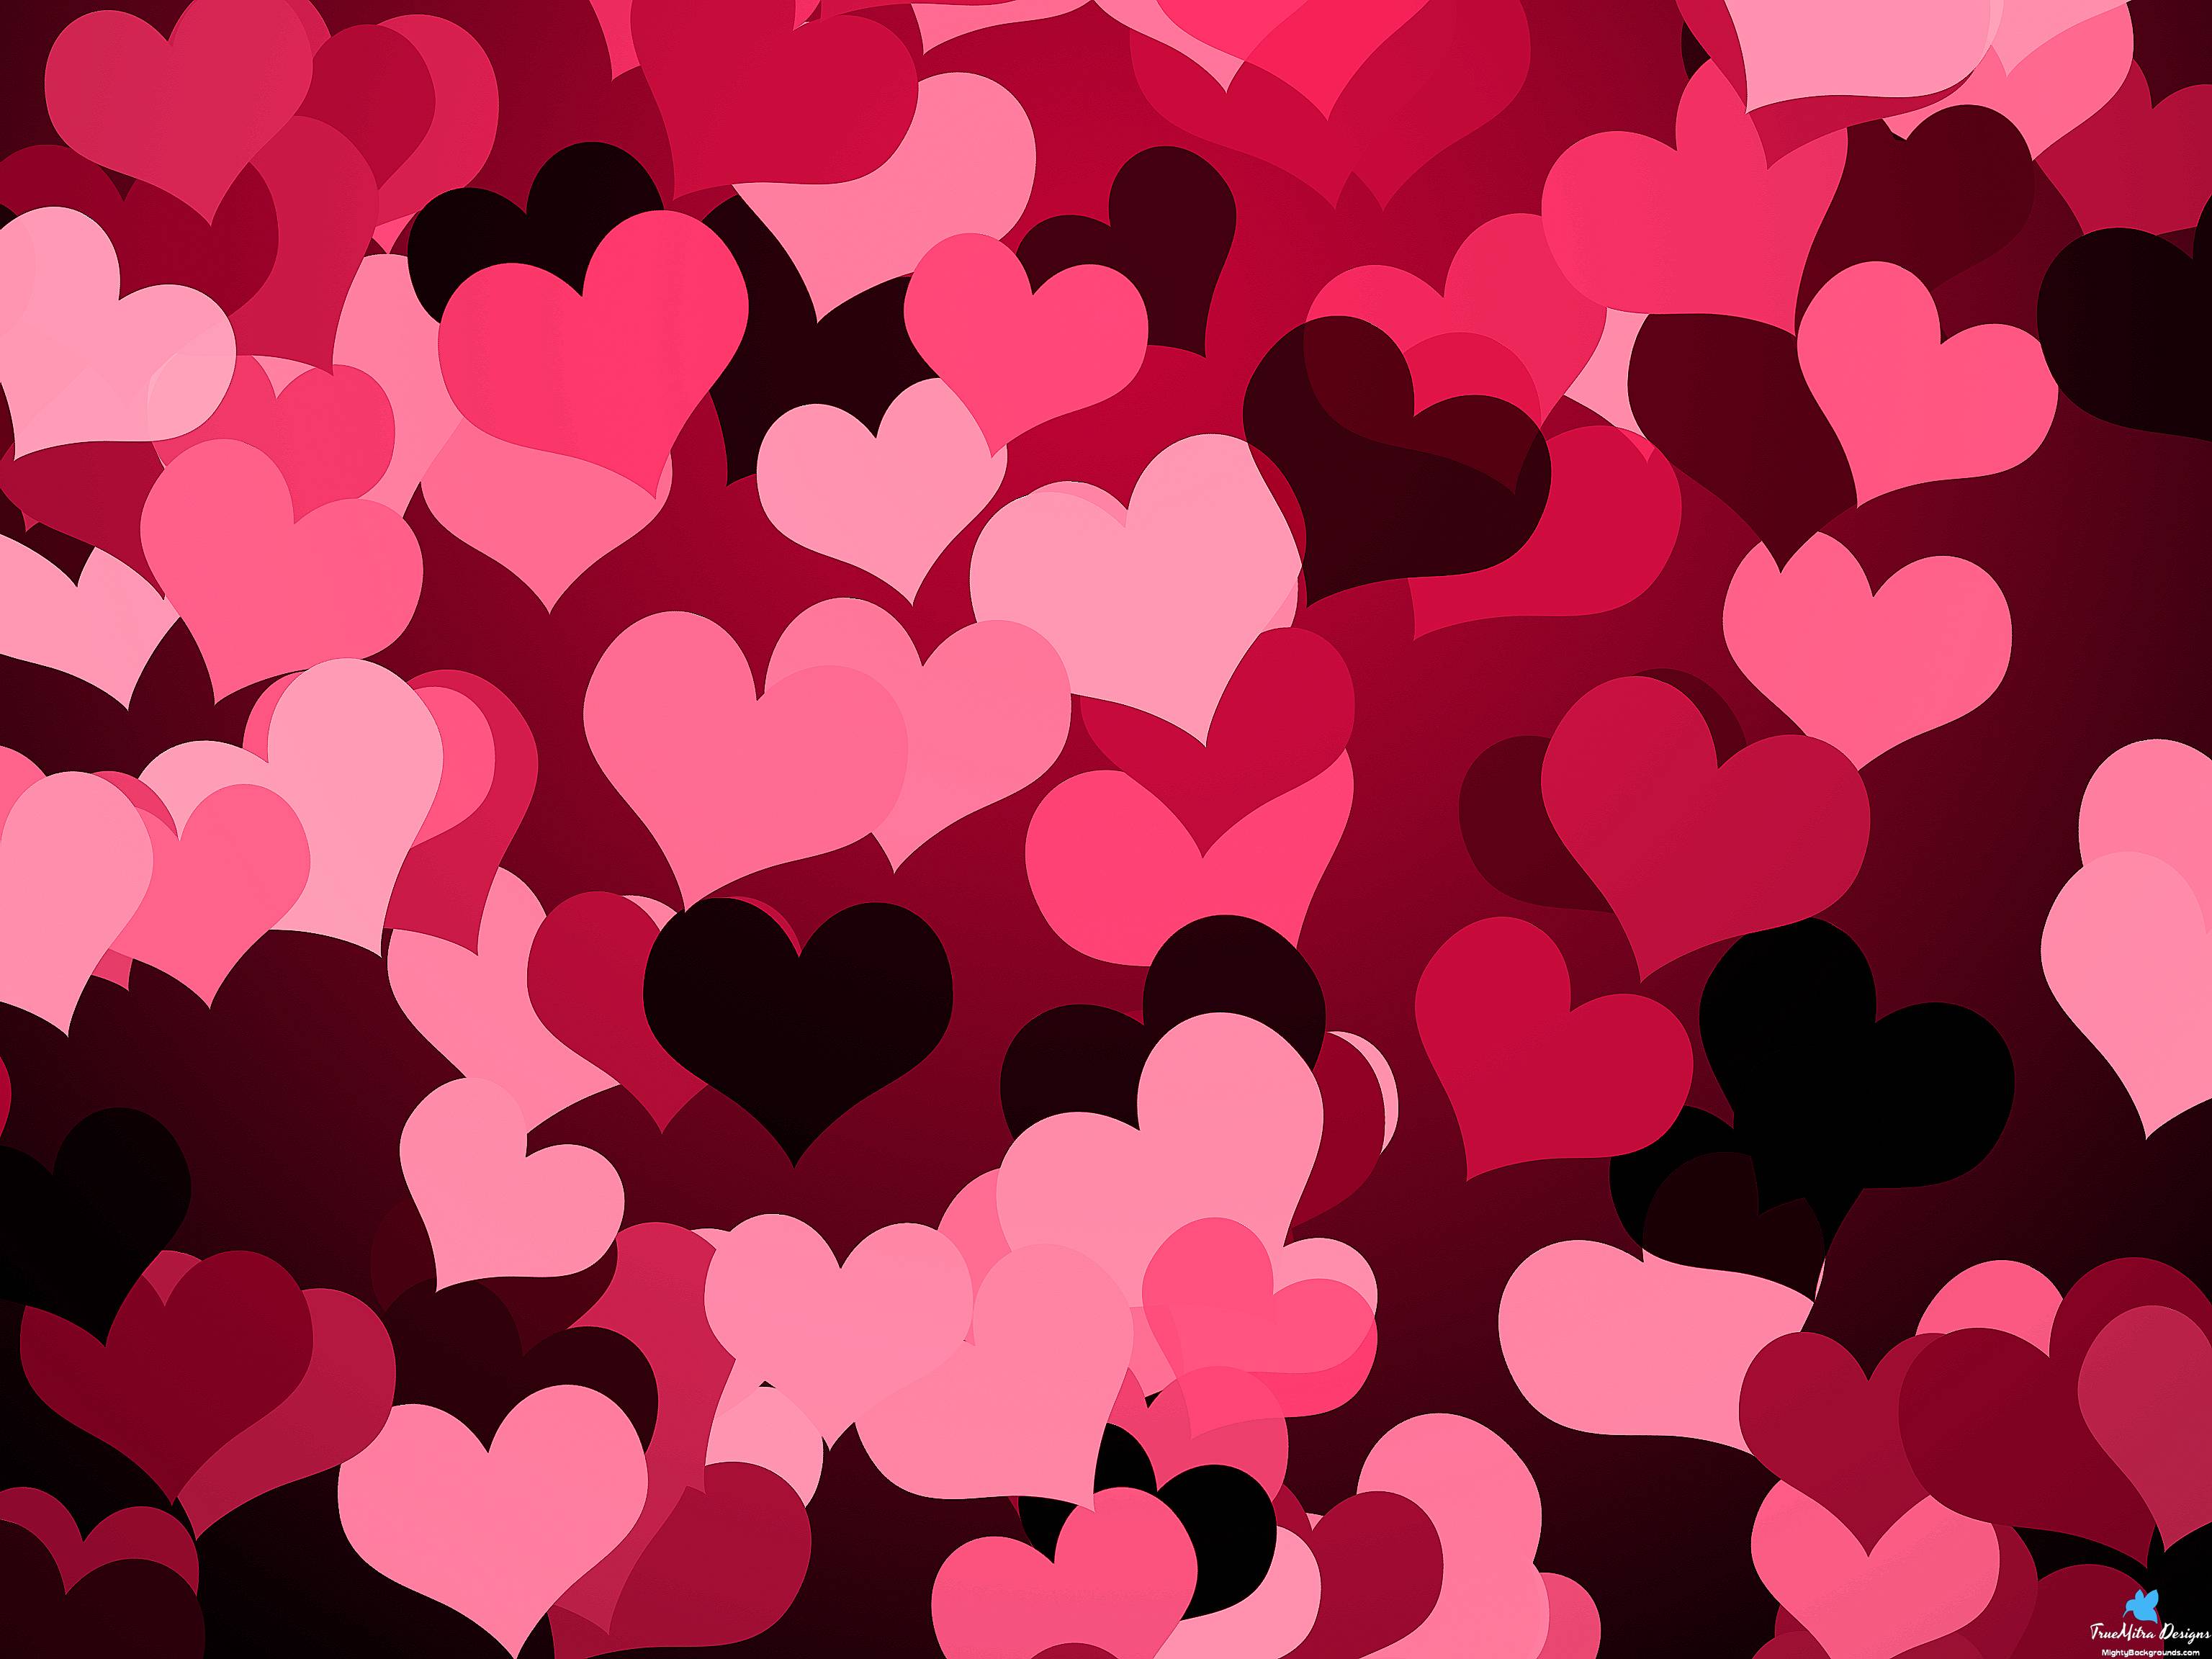 Hearts Backgrounds